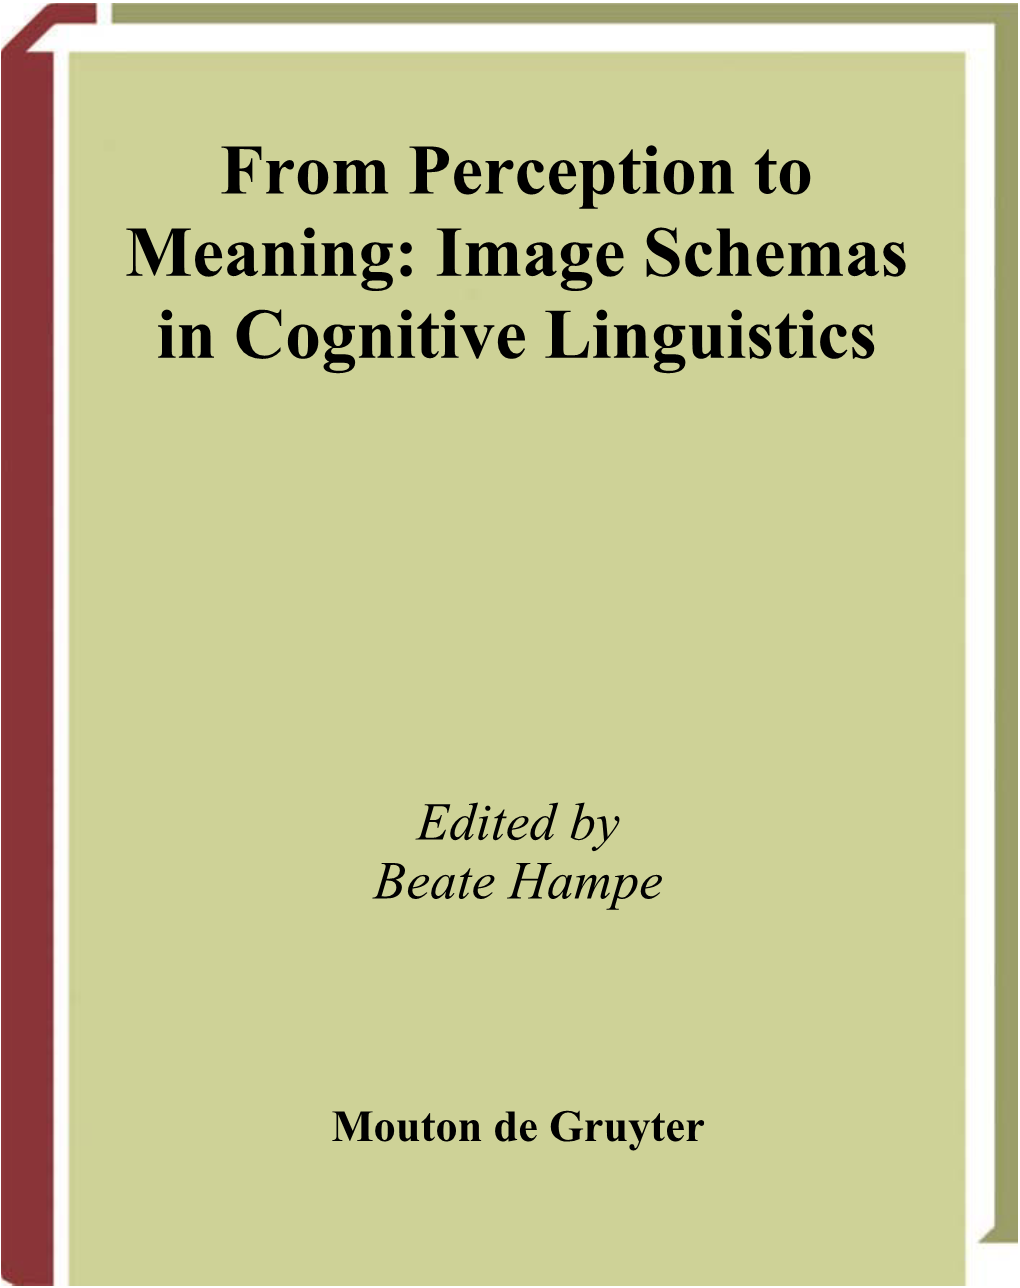 From Perception to Meaning: Image Schemas in Cognitive Linguistics